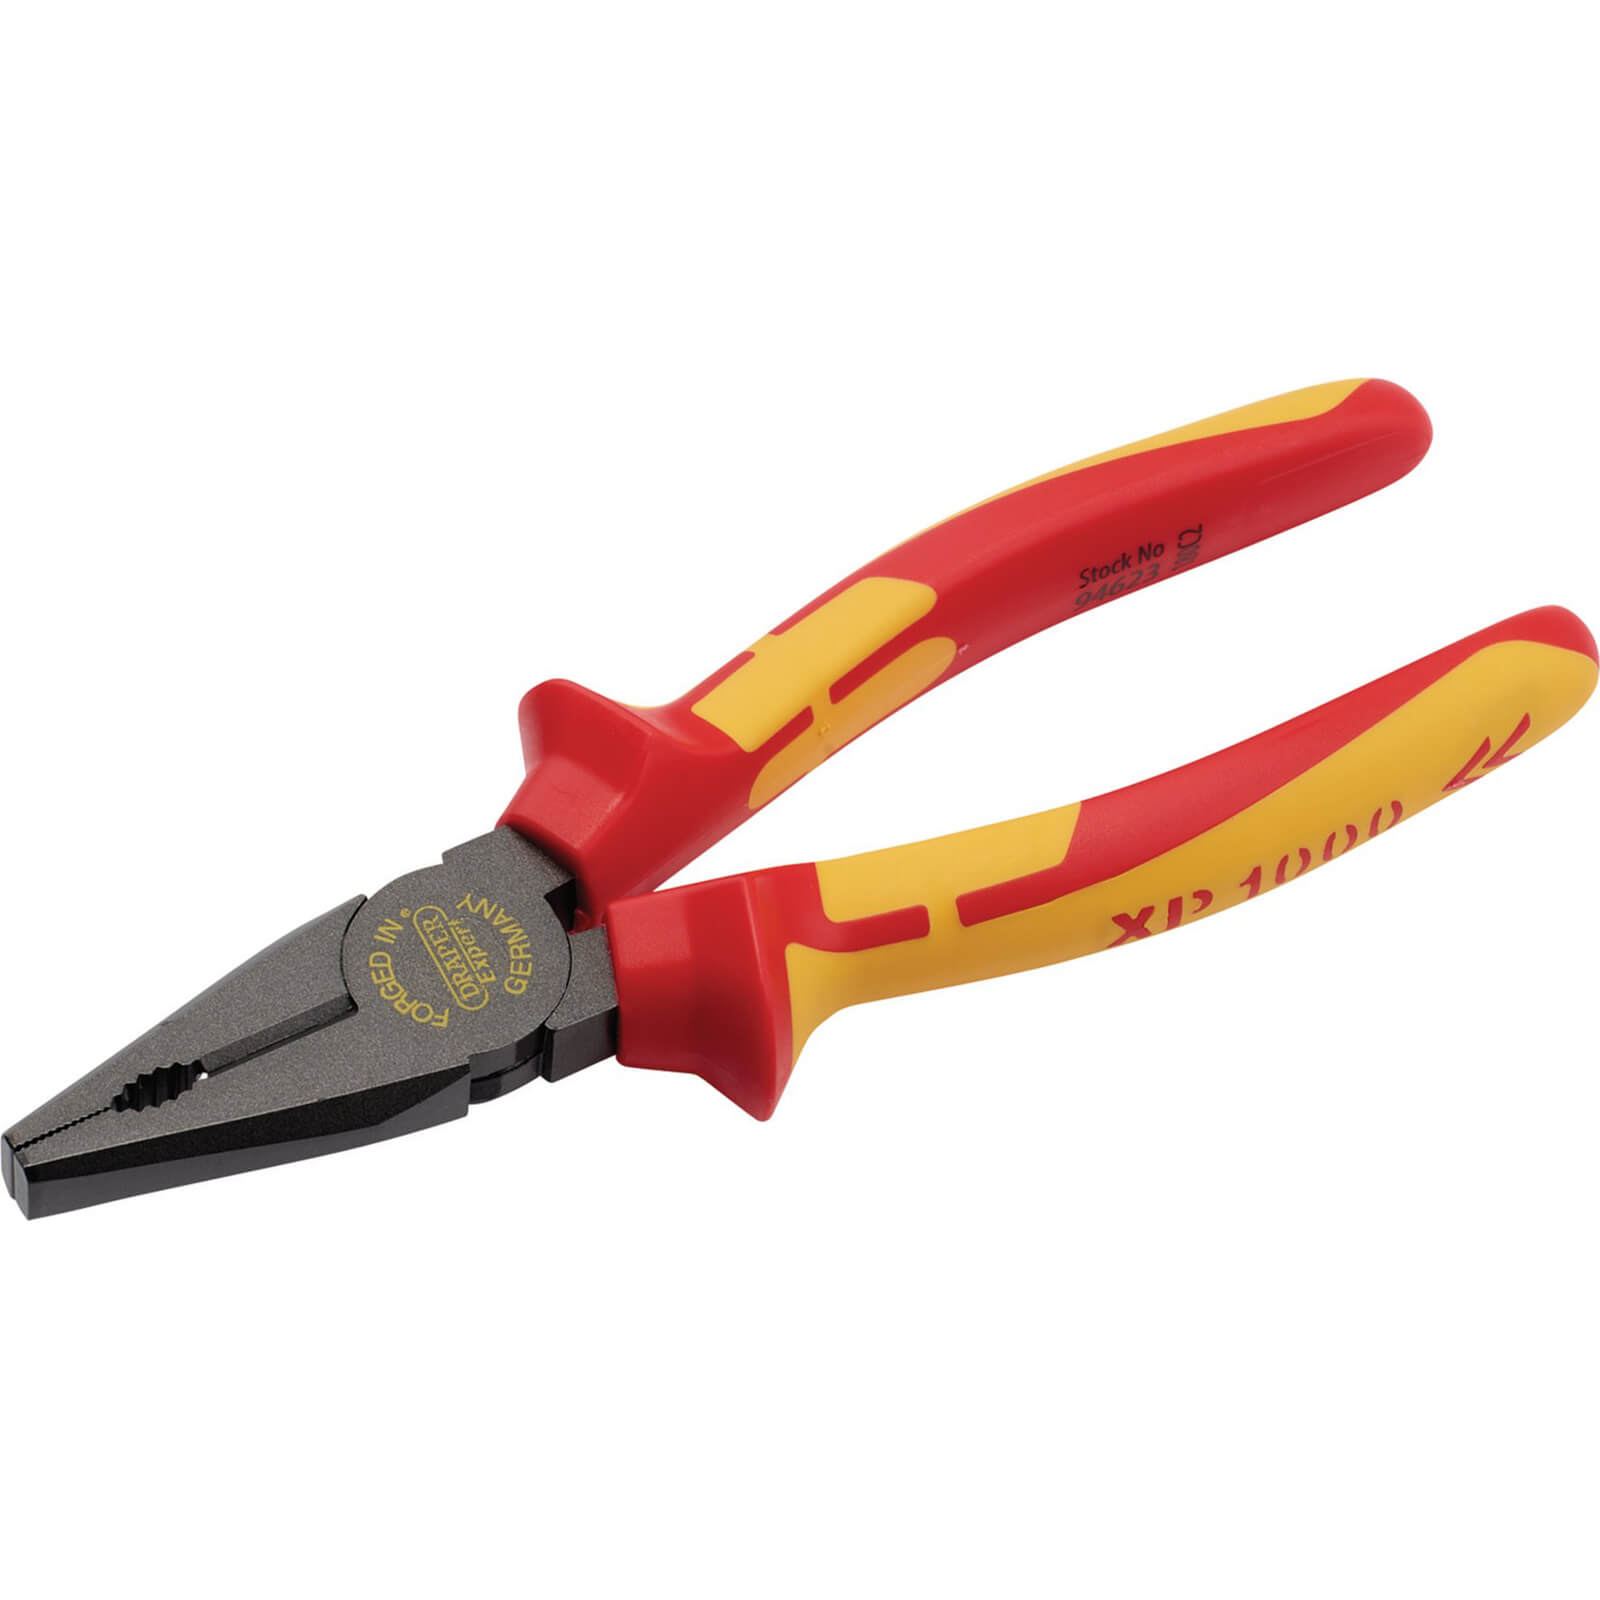 Photo of Draper Xp1000 Vde Insulated Combination Pliers 180mm